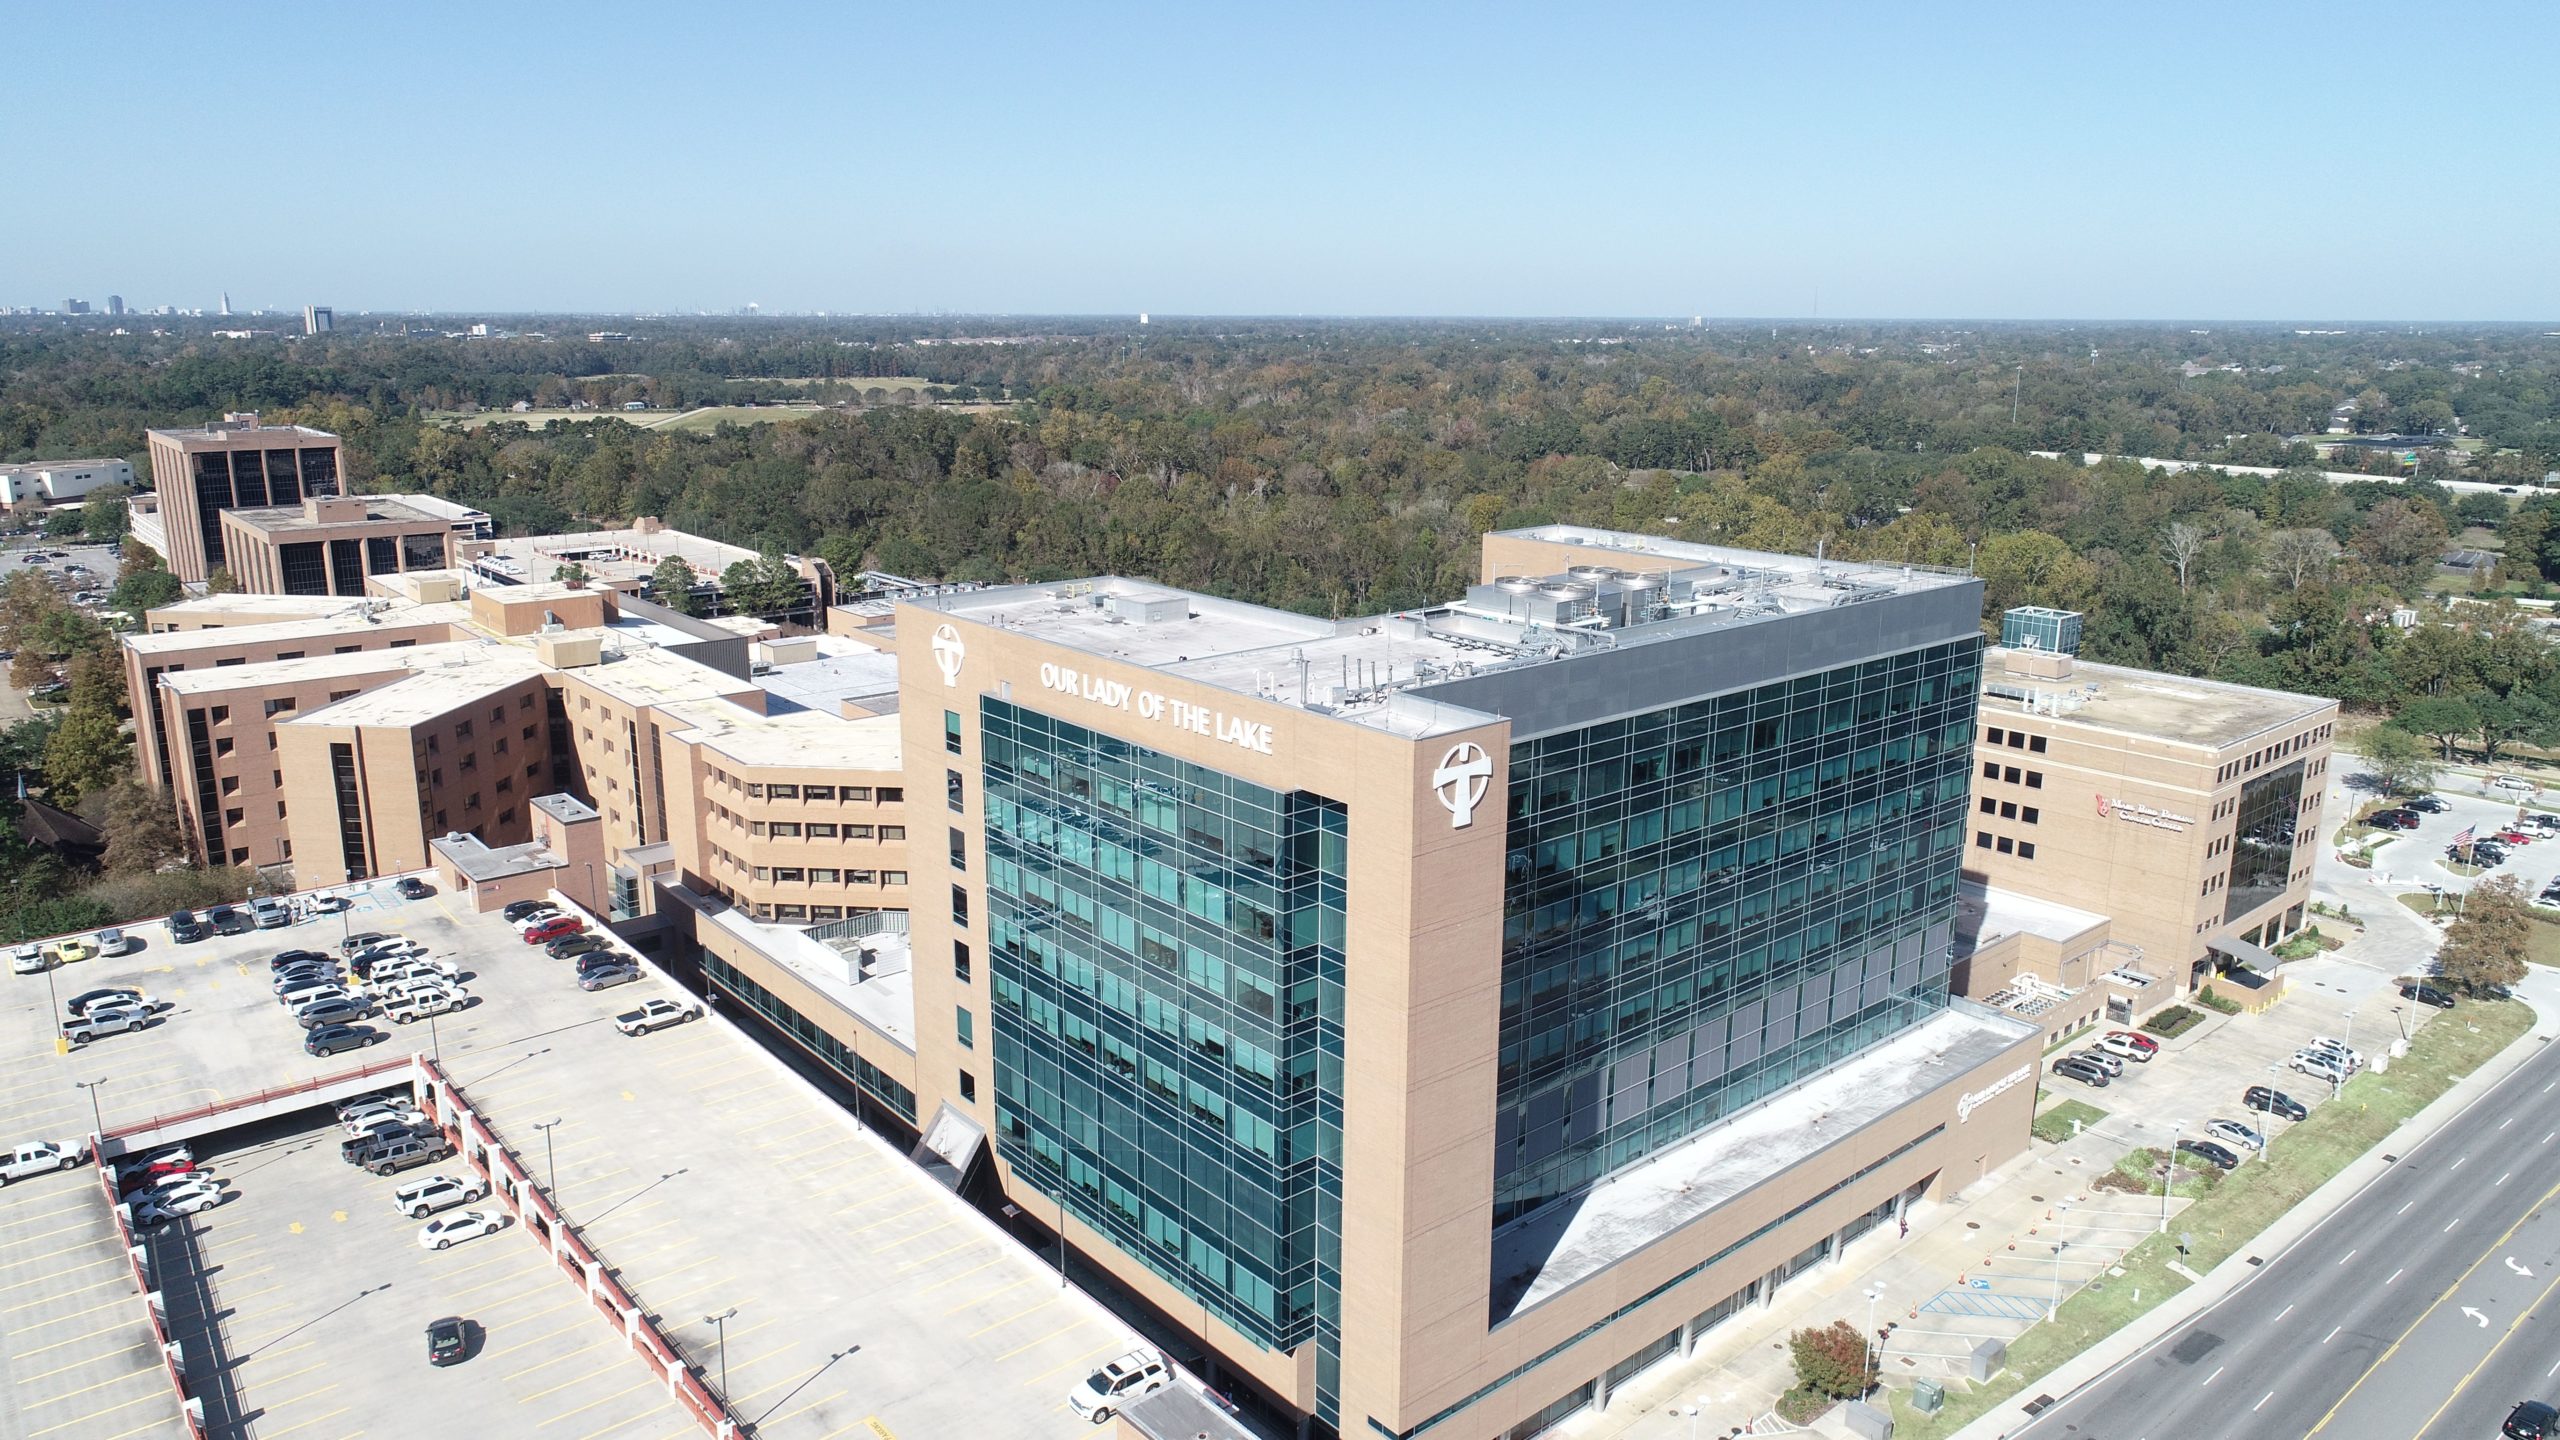 OUR LADY OF THE LAKE EMERGENCY DEPARTMENT AND EAST TOWER ADDITION